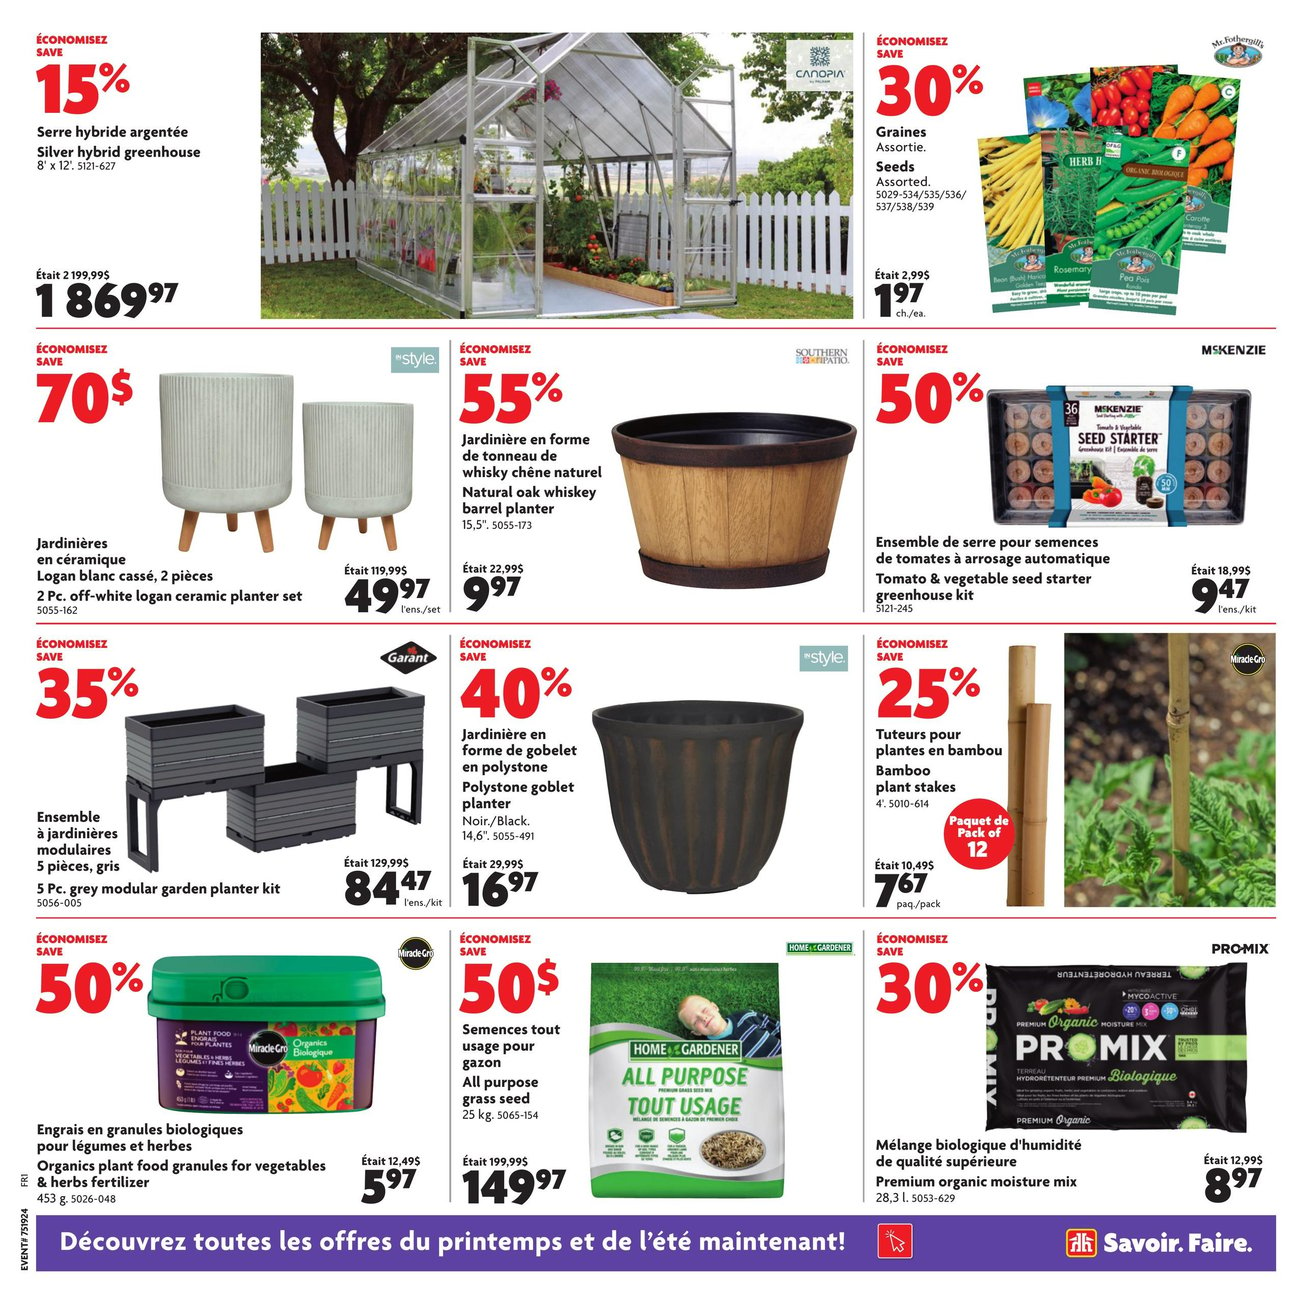 Home Hardware - Quebec - 2 Weeks of Savings - Page 14